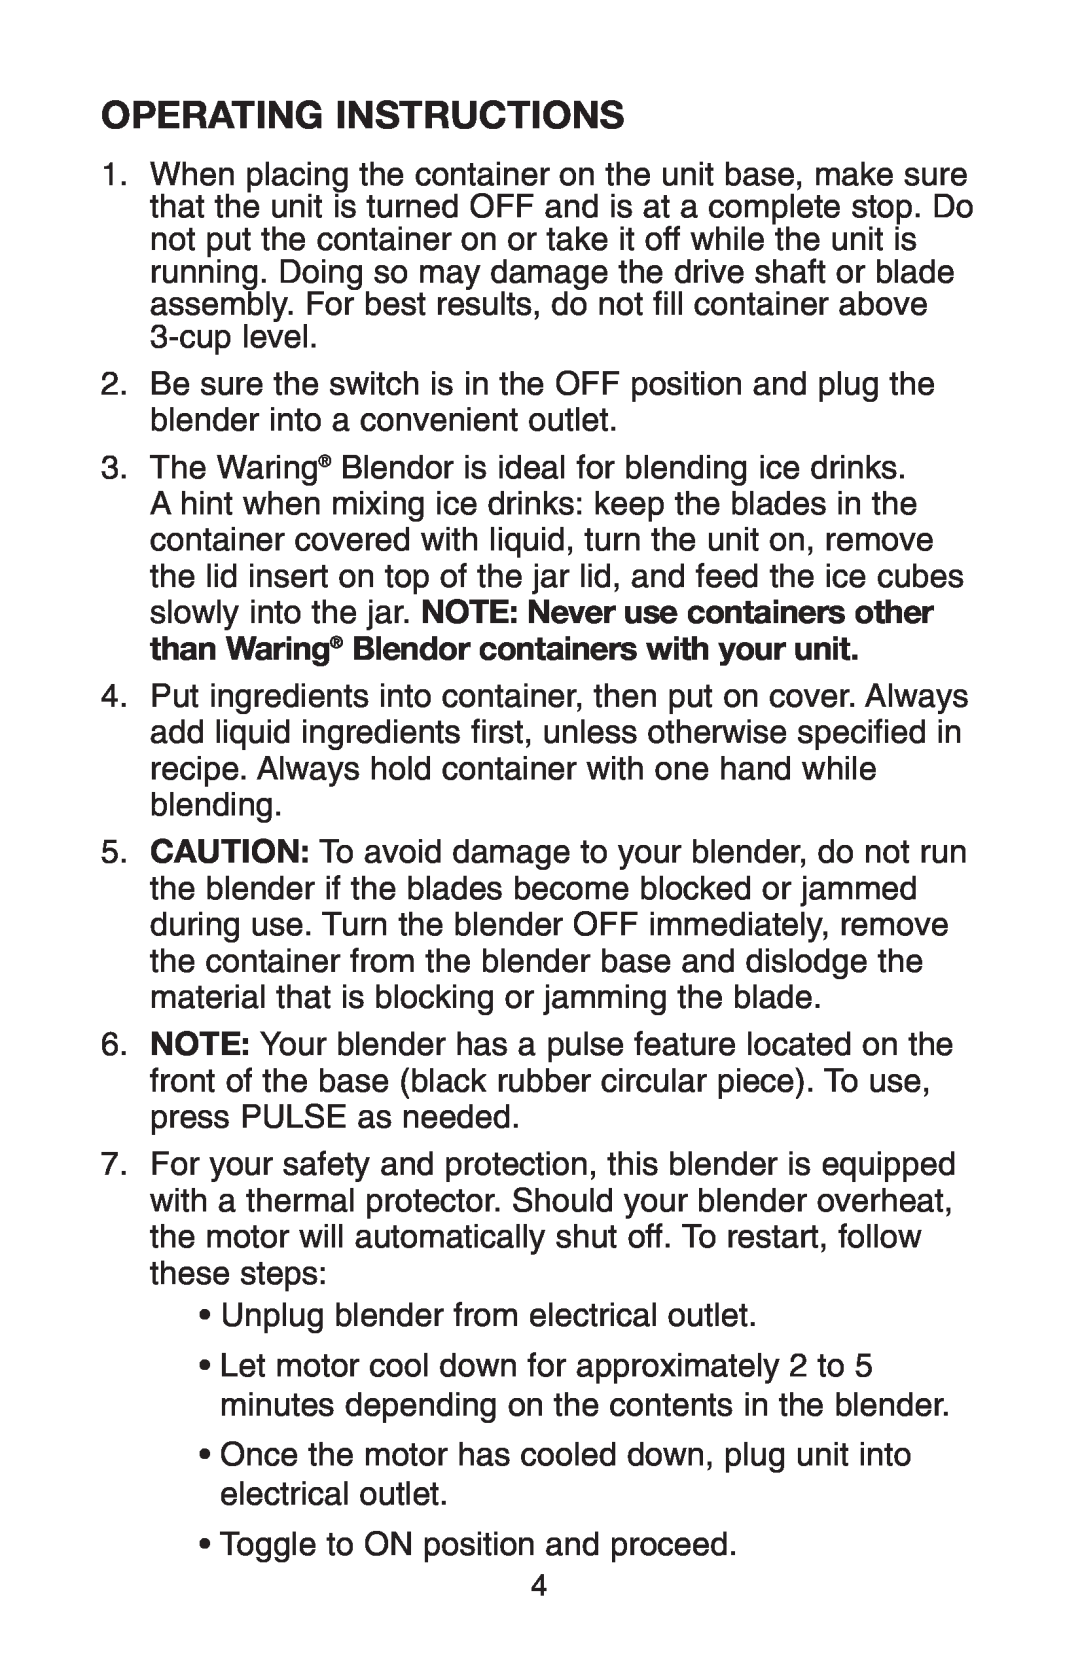 Conair RB70 manual Operating Instructions 